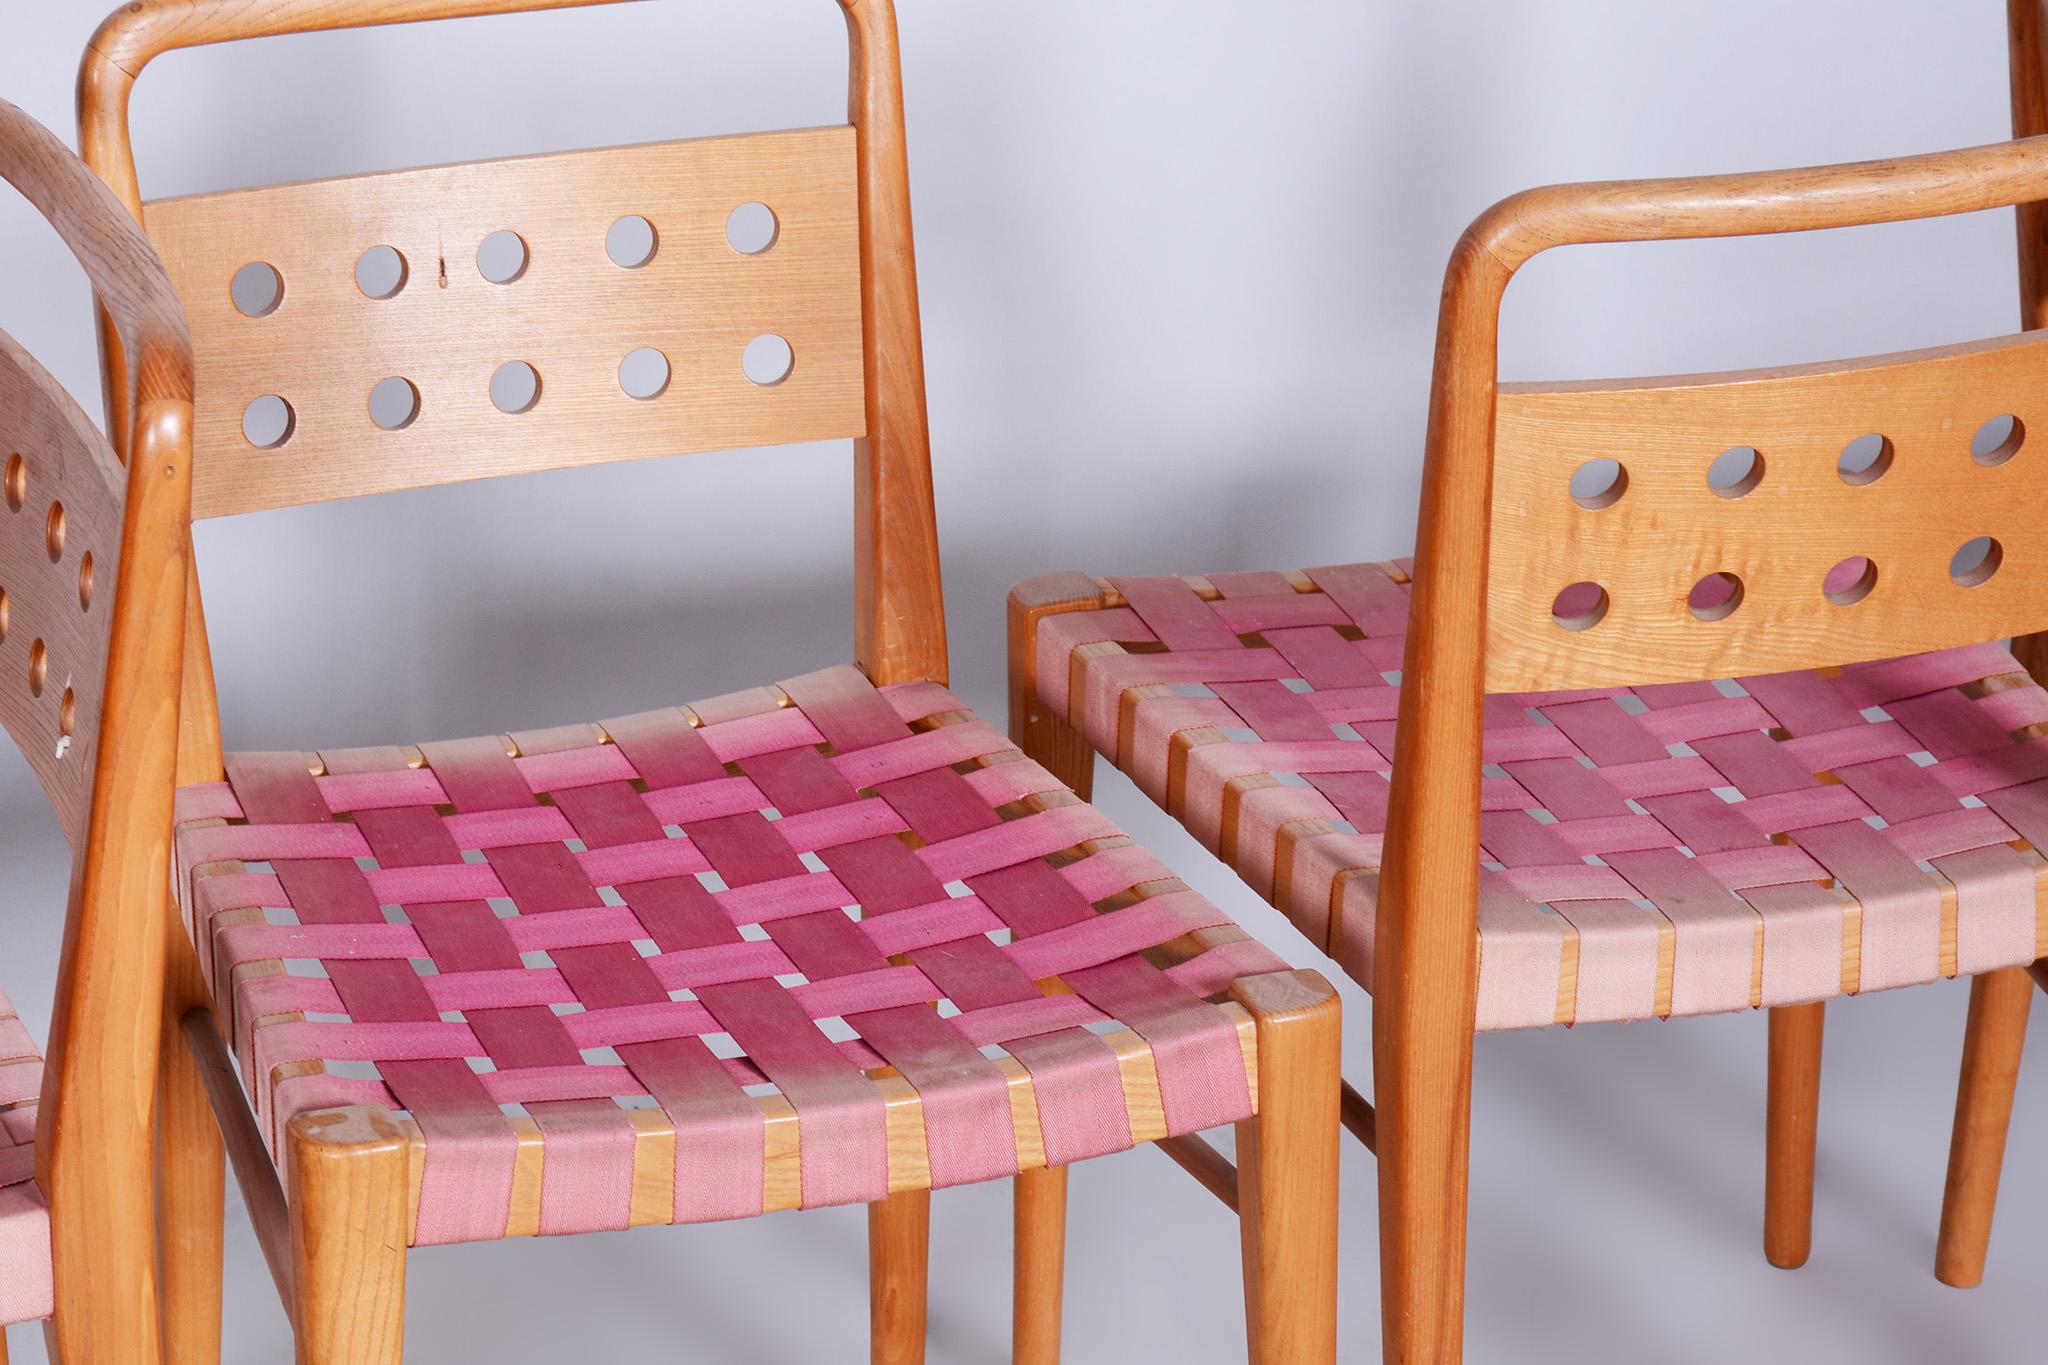 Set of Four Midcentury Ash Dining Chairs, Original Condition, Czechia, 1950s In Good Condition For Sale In Horomerice, CZ